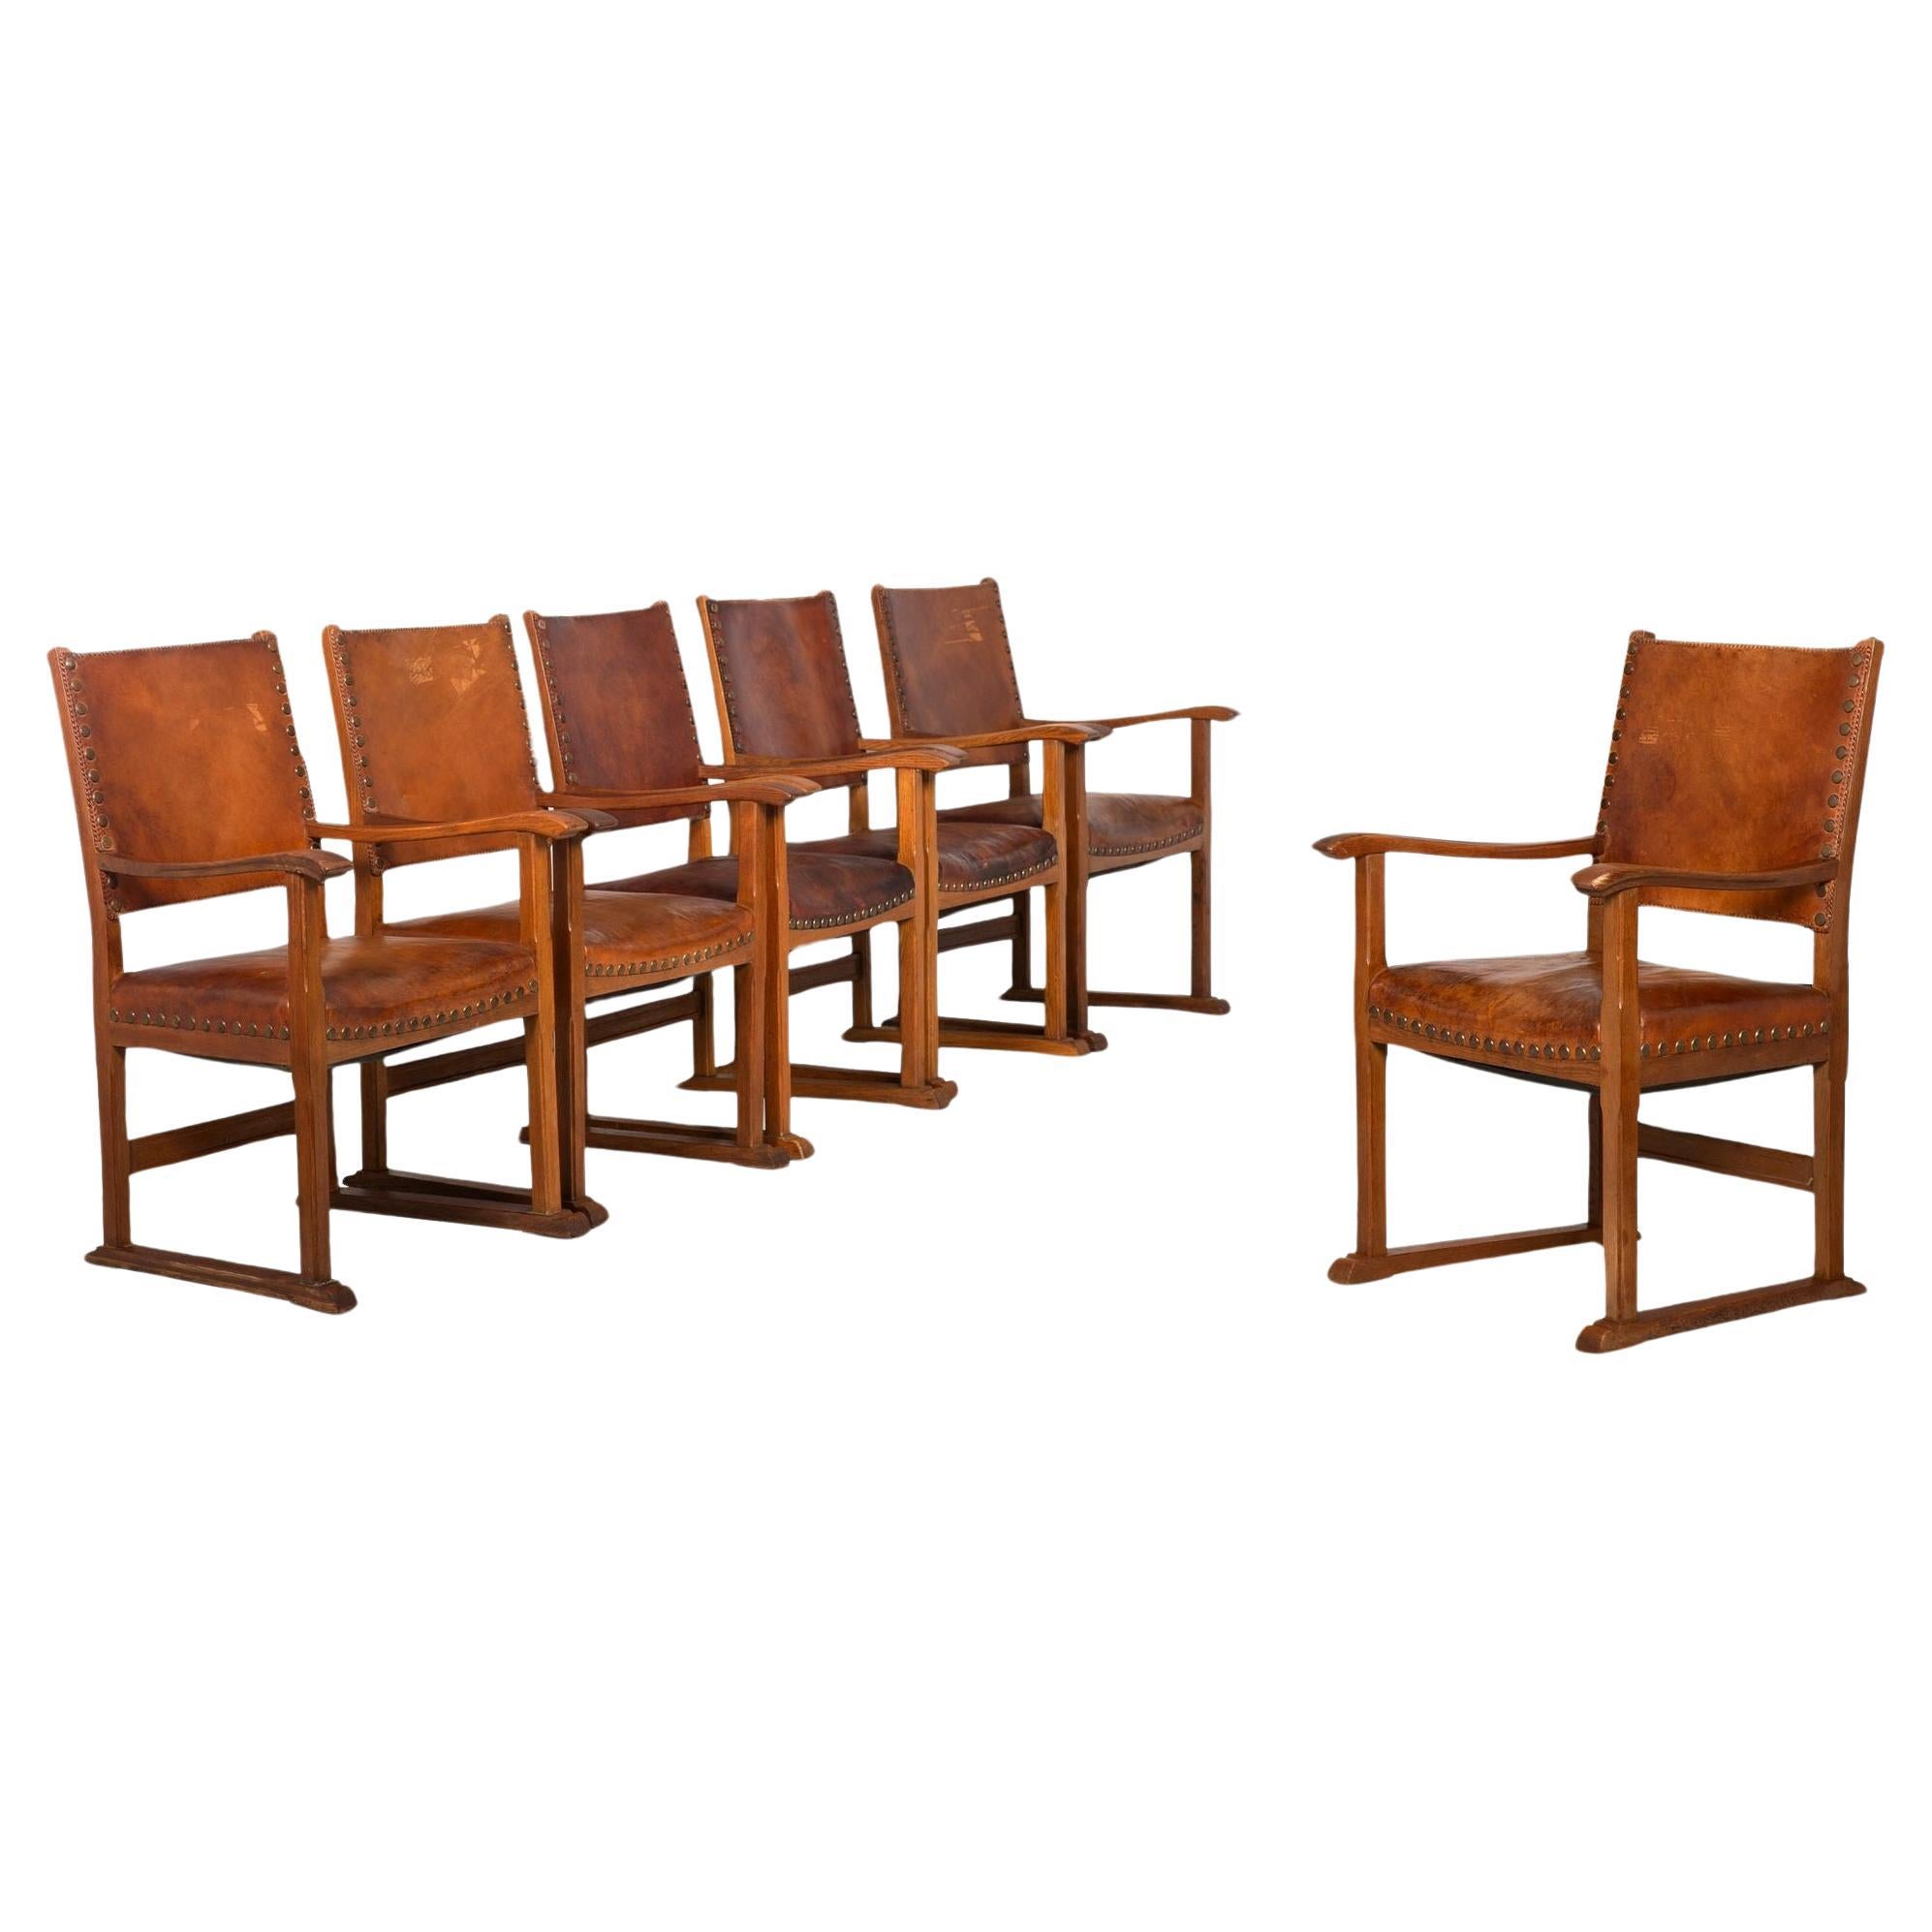 Set of 6 French Vintage Worn Oak Stitched Leather Dining Chairs For Sale